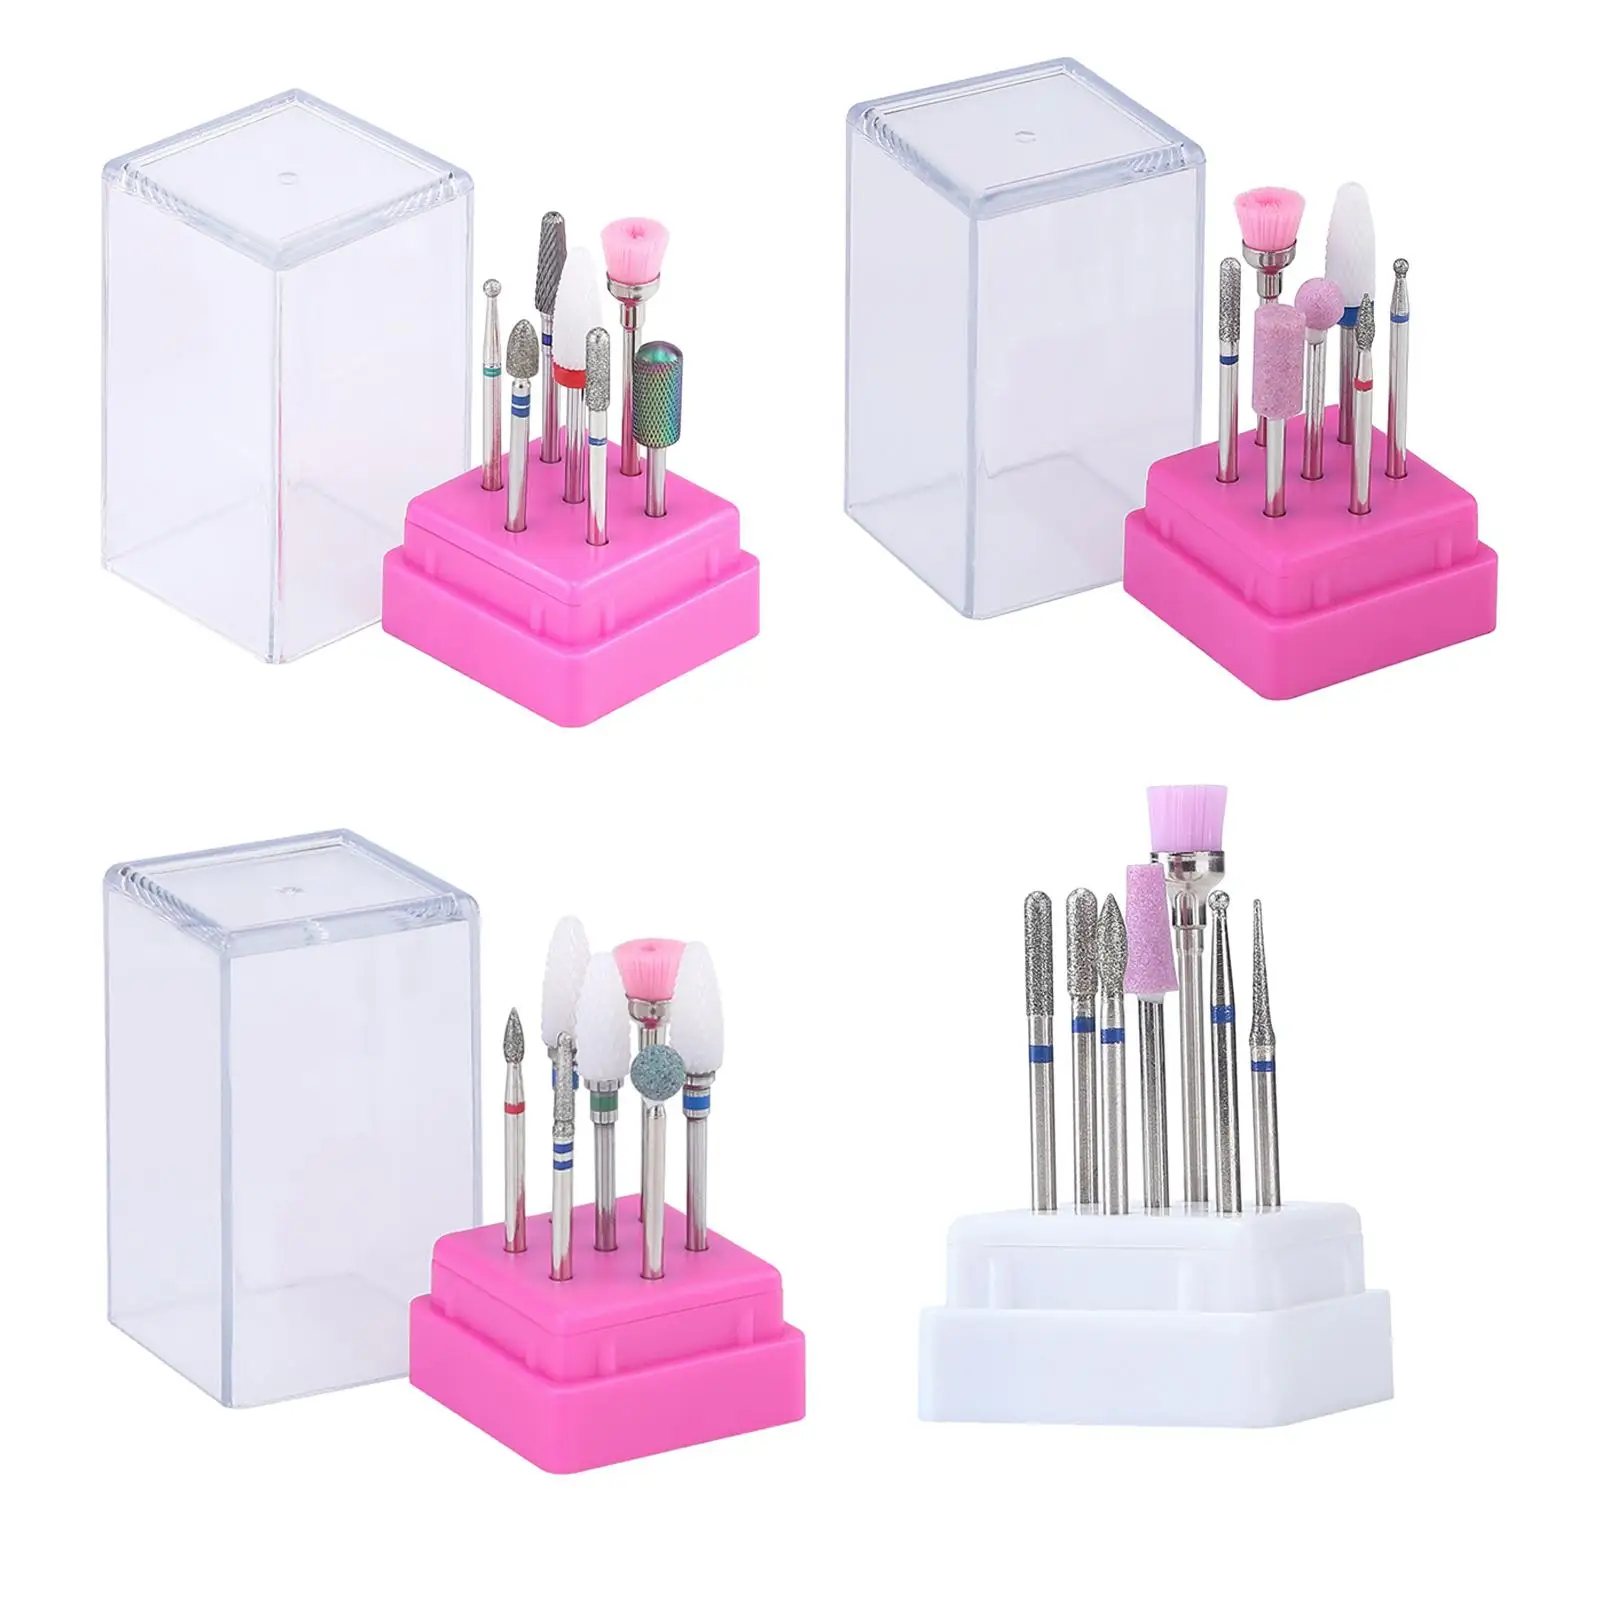 Electric Nail Drill Bits Set with Holder Box Portable 7Pcs Nail Polishing Head Set for Smooth Sculpt Cleaning Care Professionals